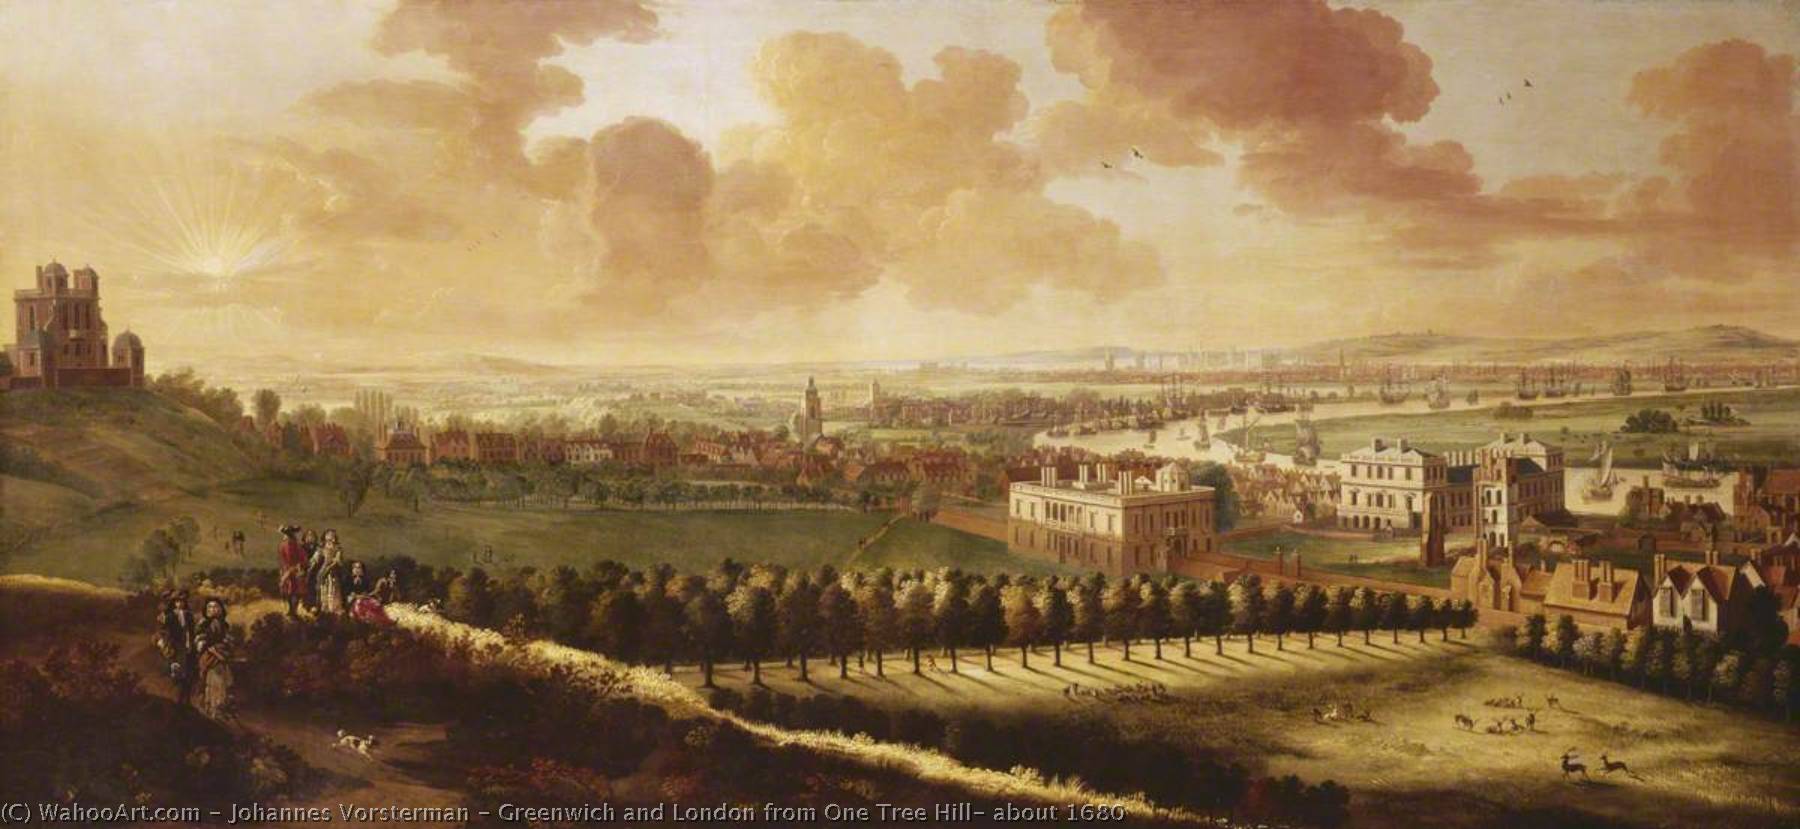 WikiOO.org - 백과 사전 - 회화, 삽화 Johannes Vorsterman - Greenwich and London from One Tree Hill, about 1680